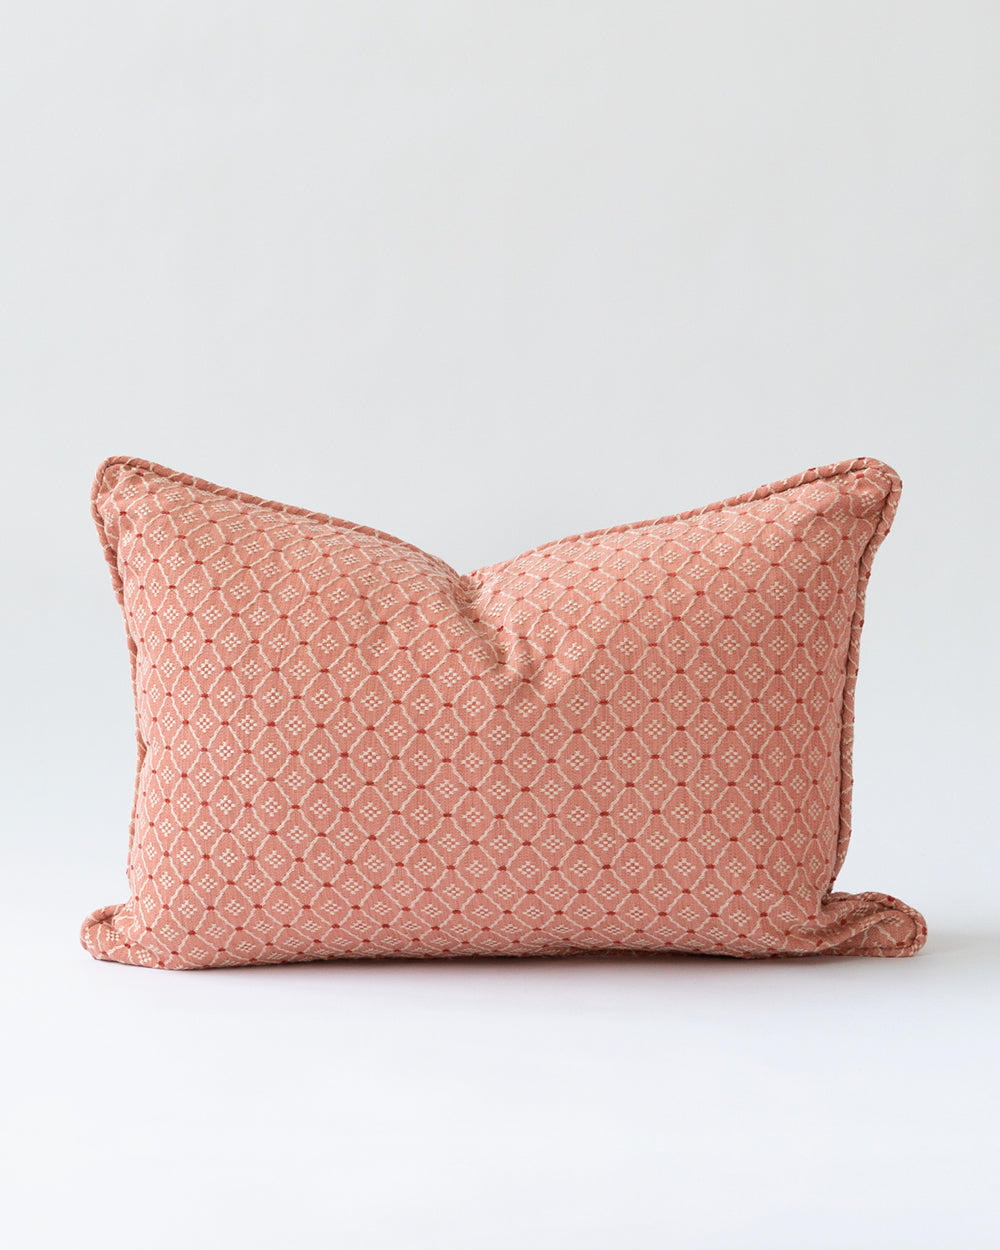 Embroidered pink pillow.